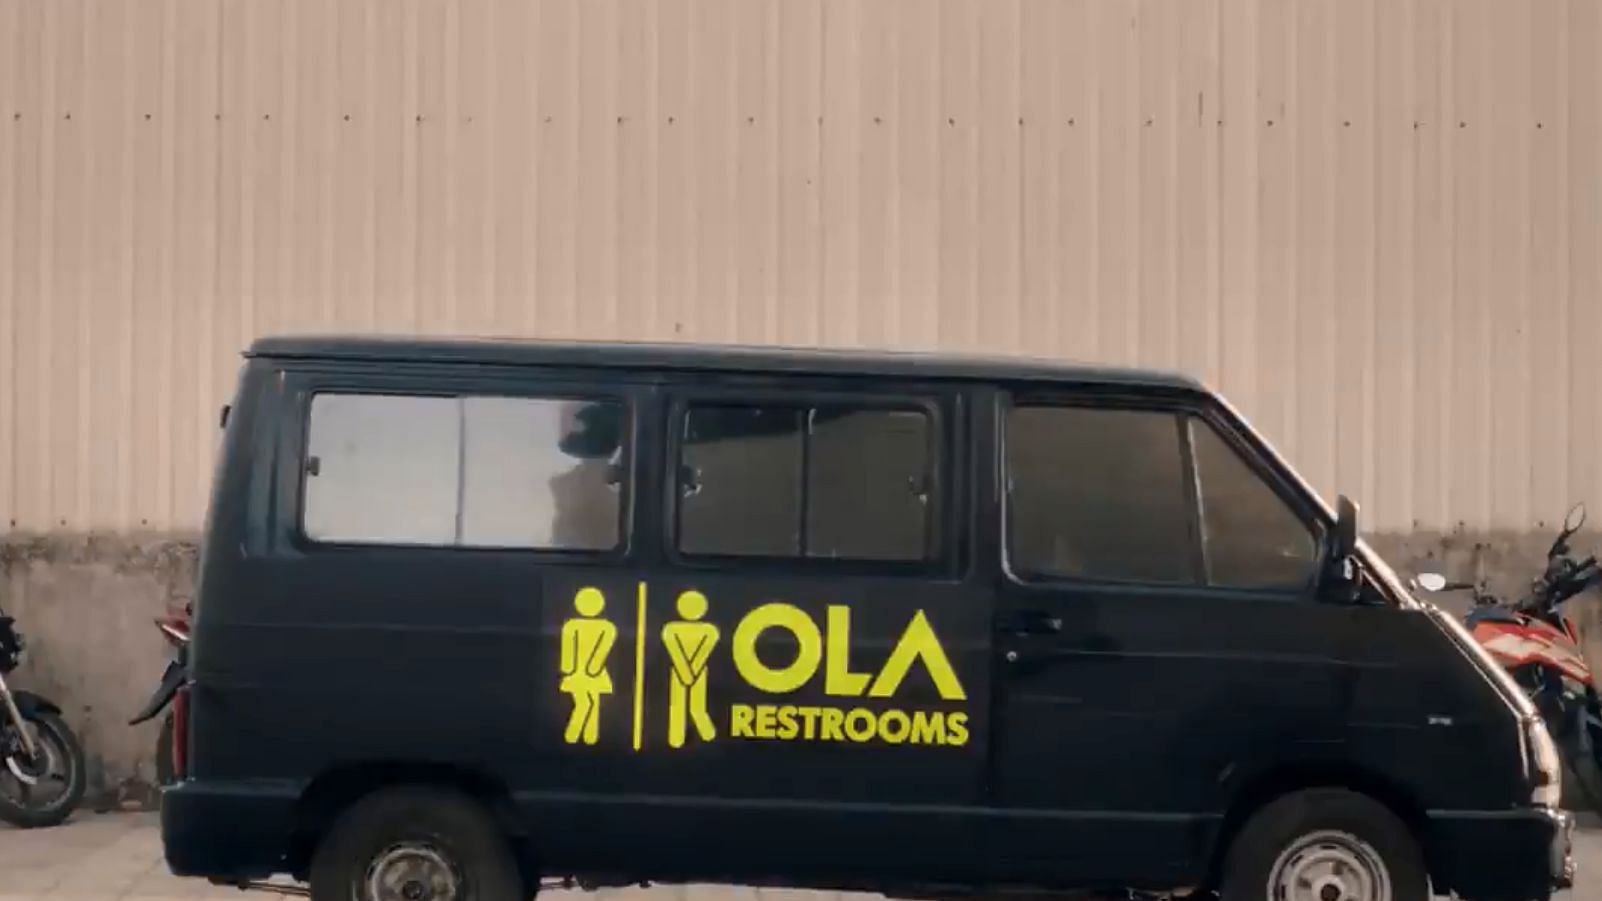 Looking for a restroom would never be the same, if this were true.